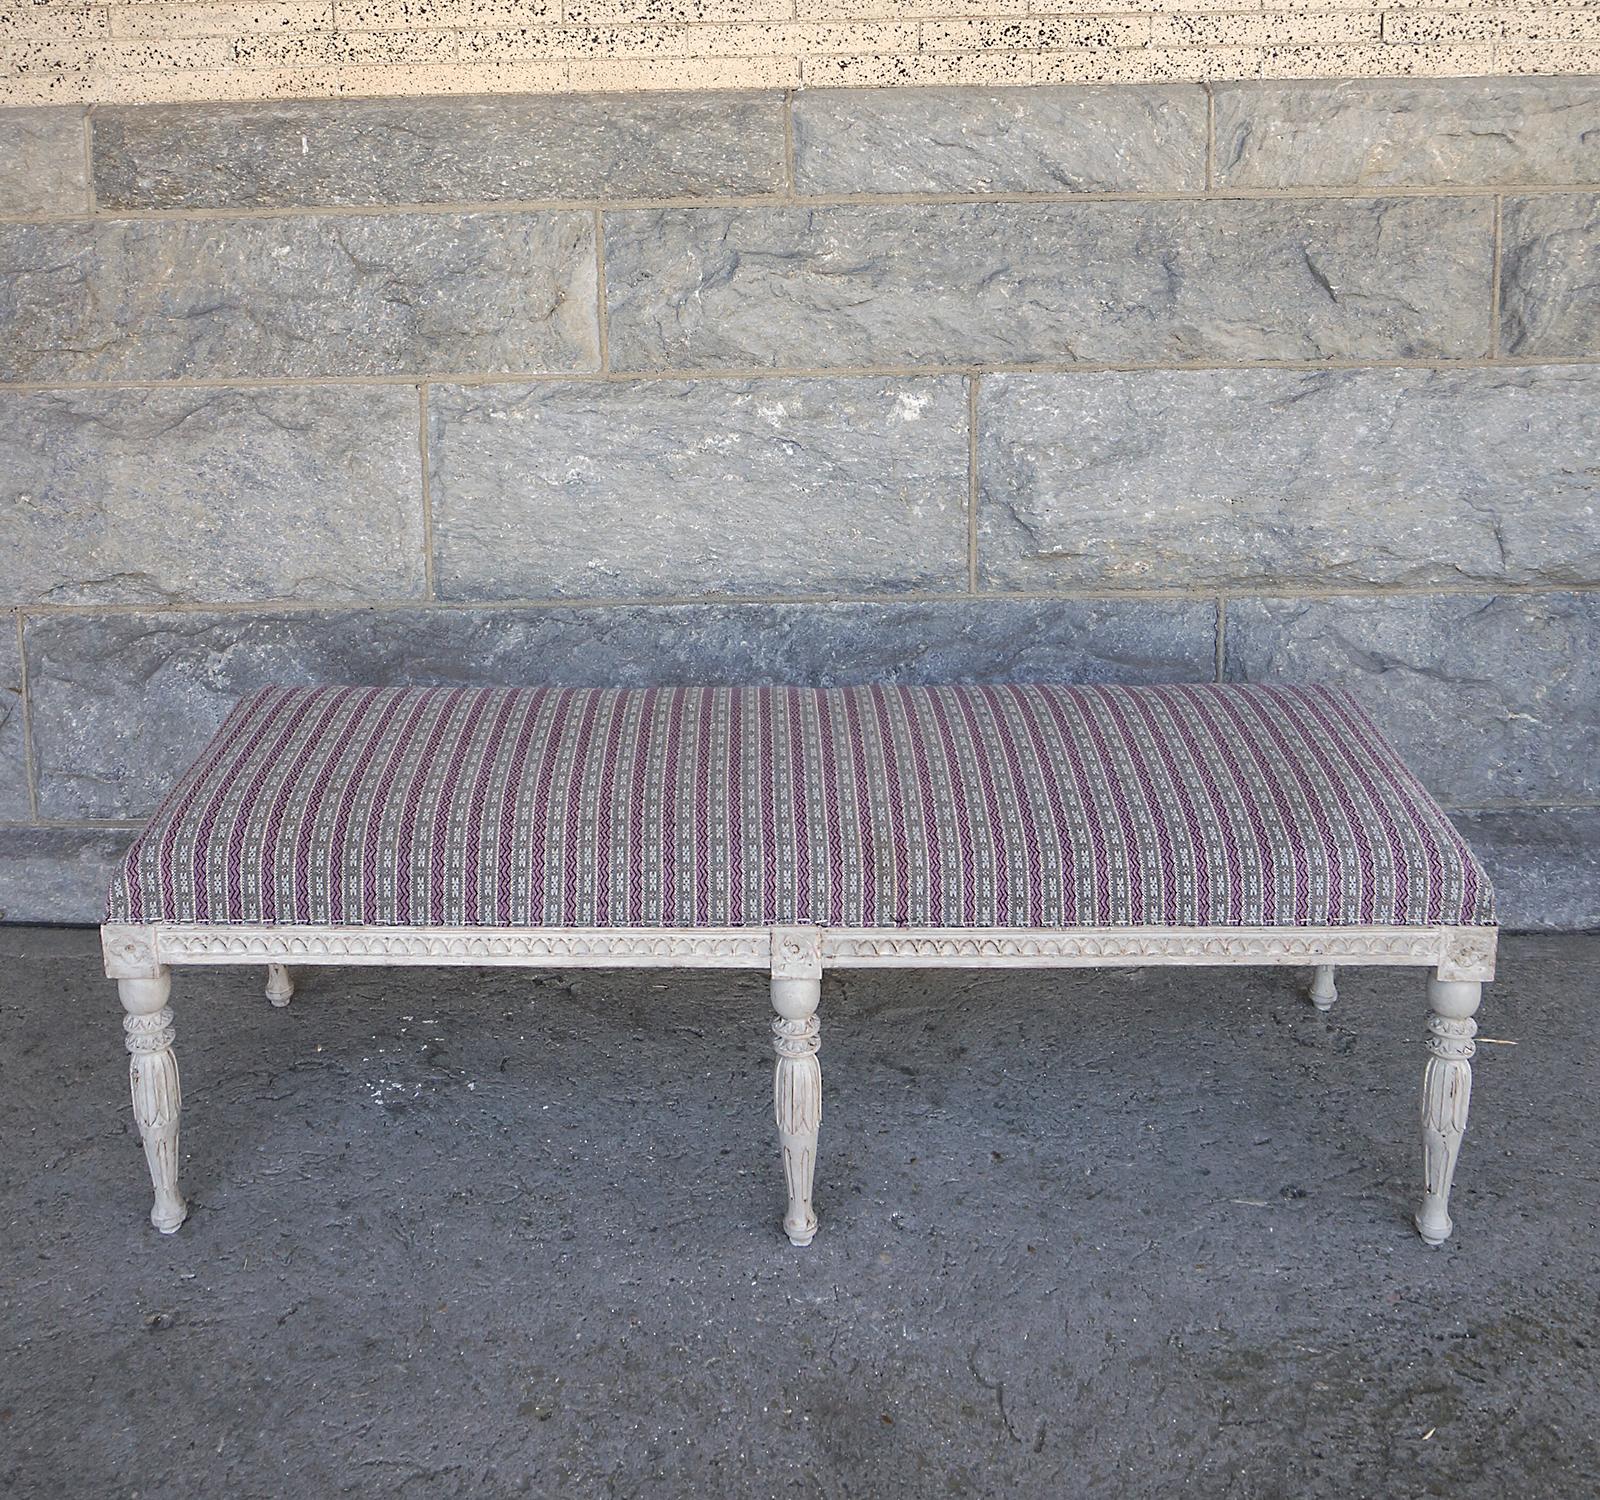 Upholstered Swedish bench, circa 1880, in the Gustavian style. Nicely carved lamb’s tongue molding along the seat rails, interrupted by blocks with carved rosettes where each of the six legs is attached. Sturdy and comfortable, and ready for your